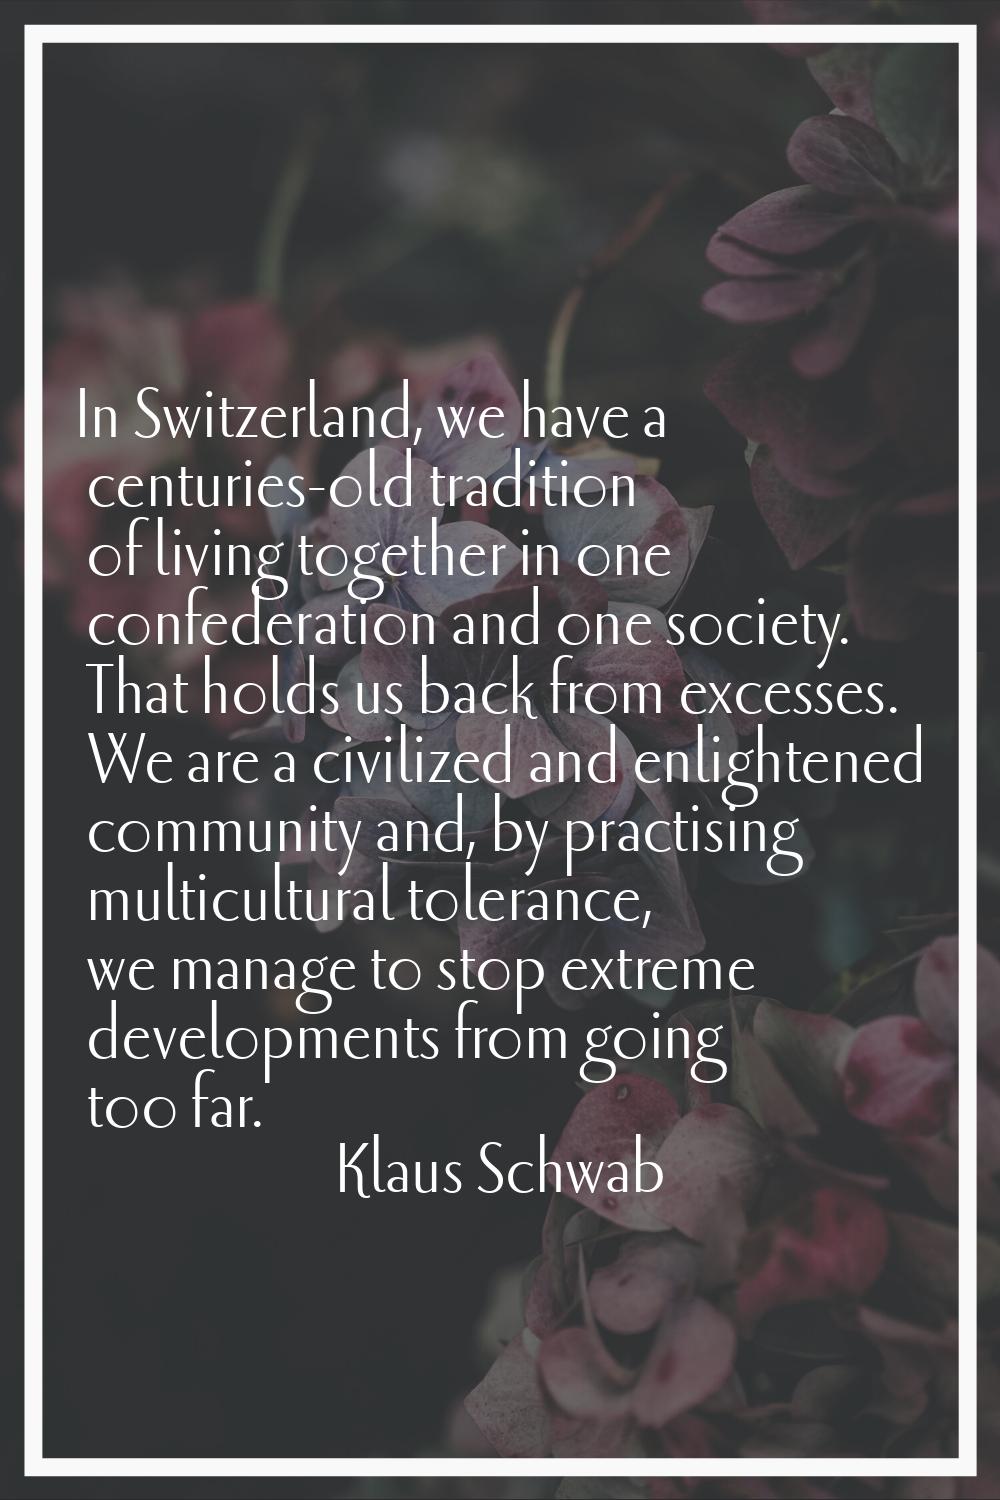 In Switzerland, we have a centuries-old tradition of living together in one confederation and one s